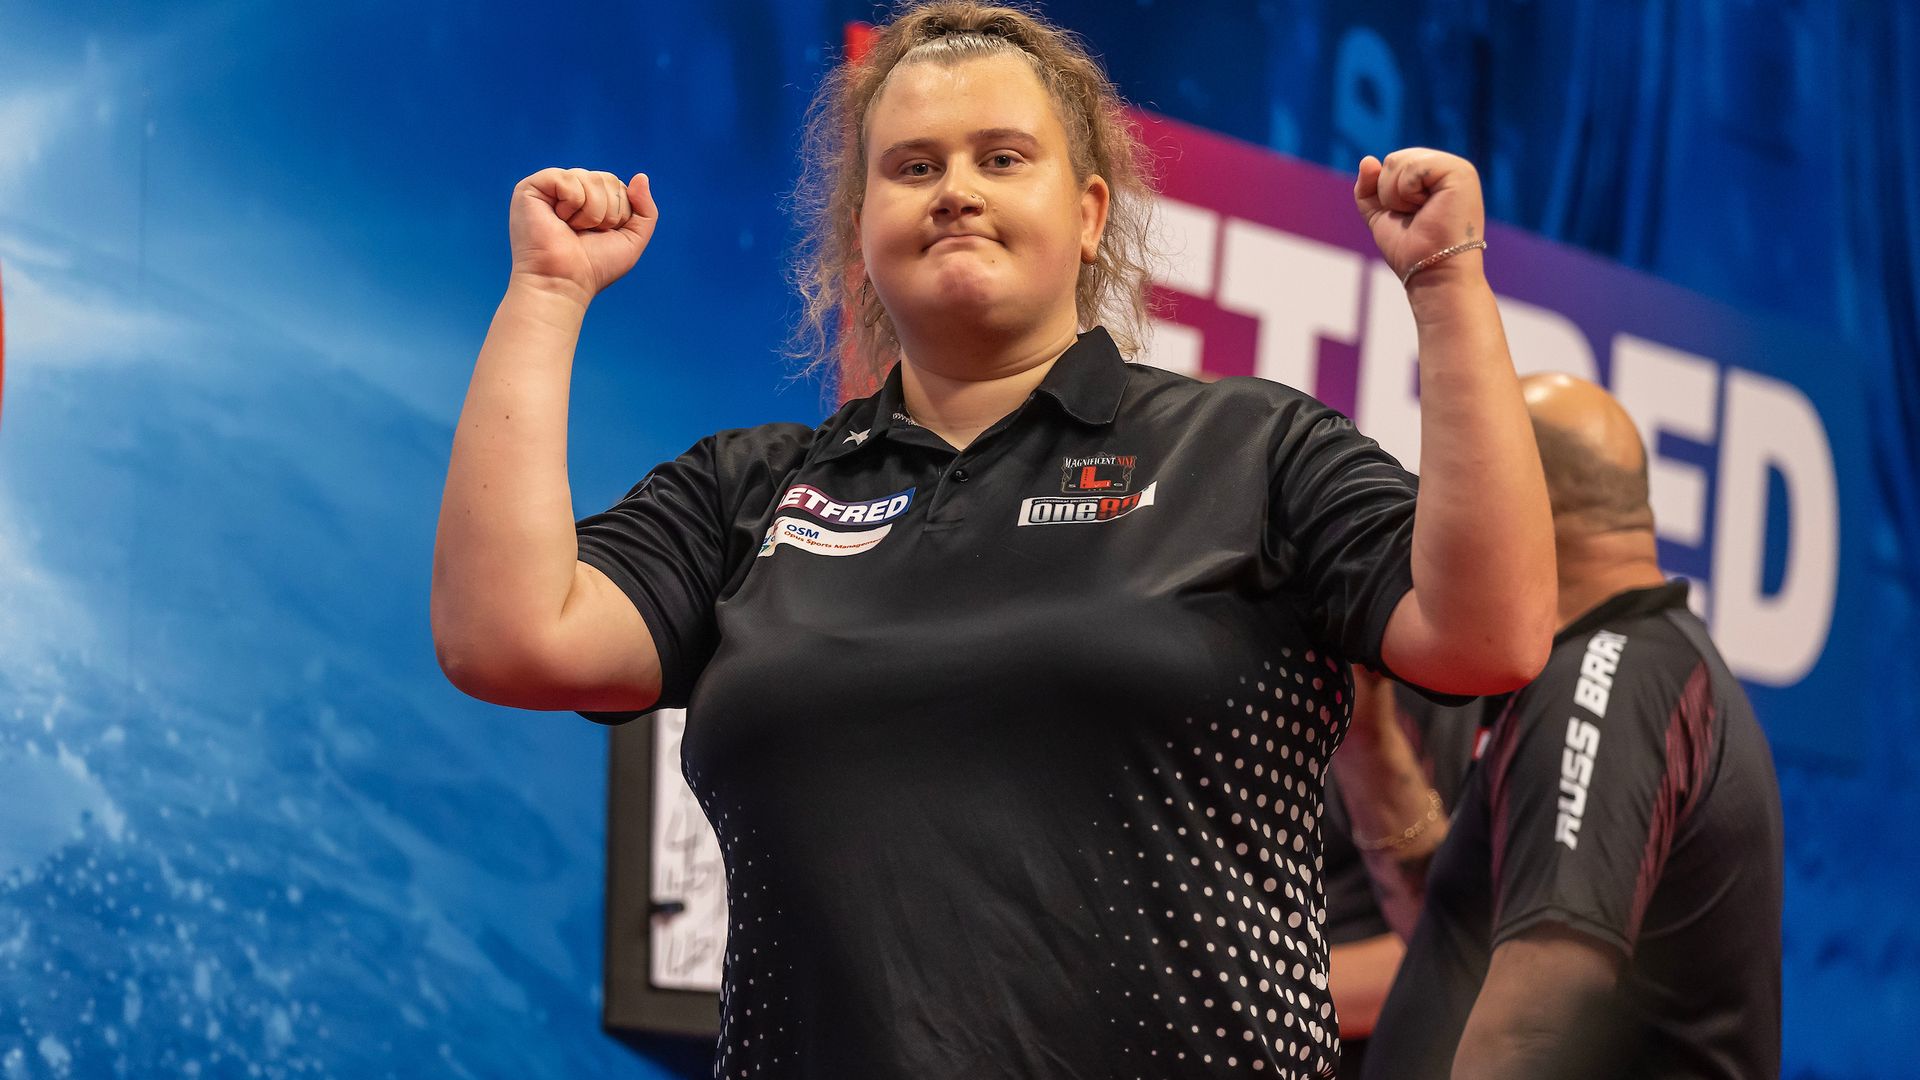 How Greaves won the Women's World Matchplay title